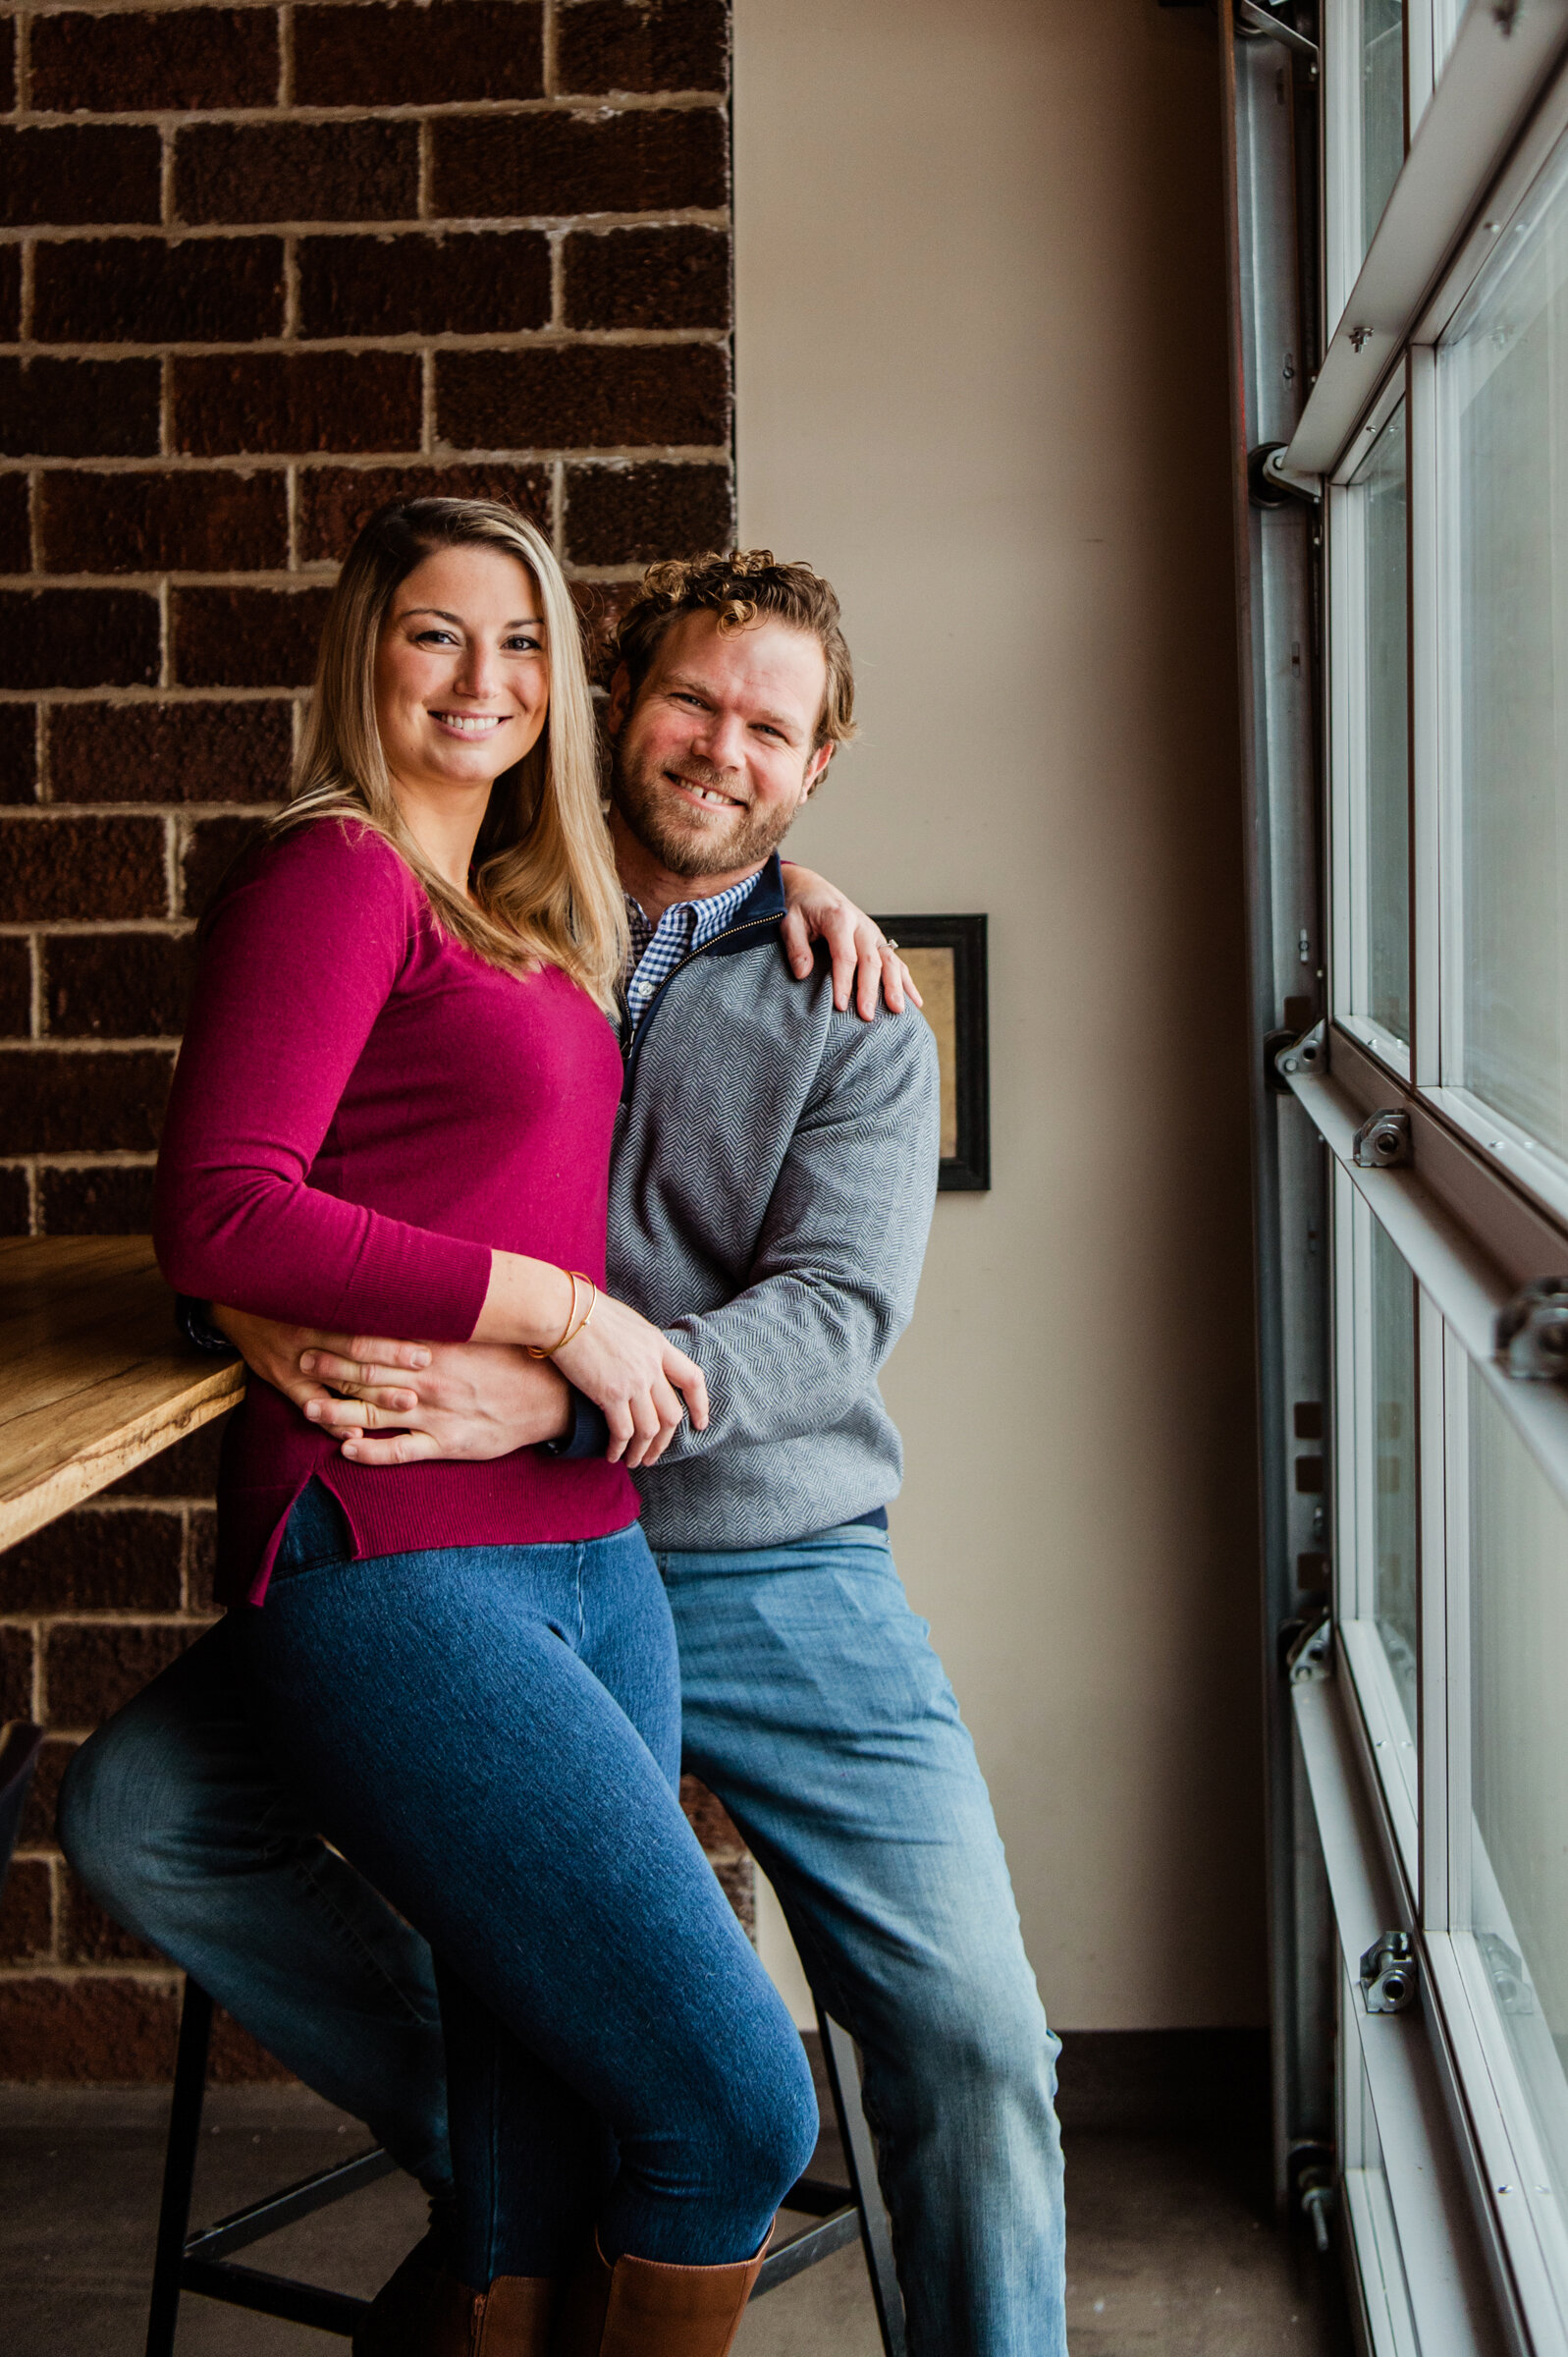 Irondequoit_Beer_Company_Durand_Eastman_Park_Rochester_Engagement_Session_JILL_STUDIO_Rochester_NY_Photographer_6999.jpg